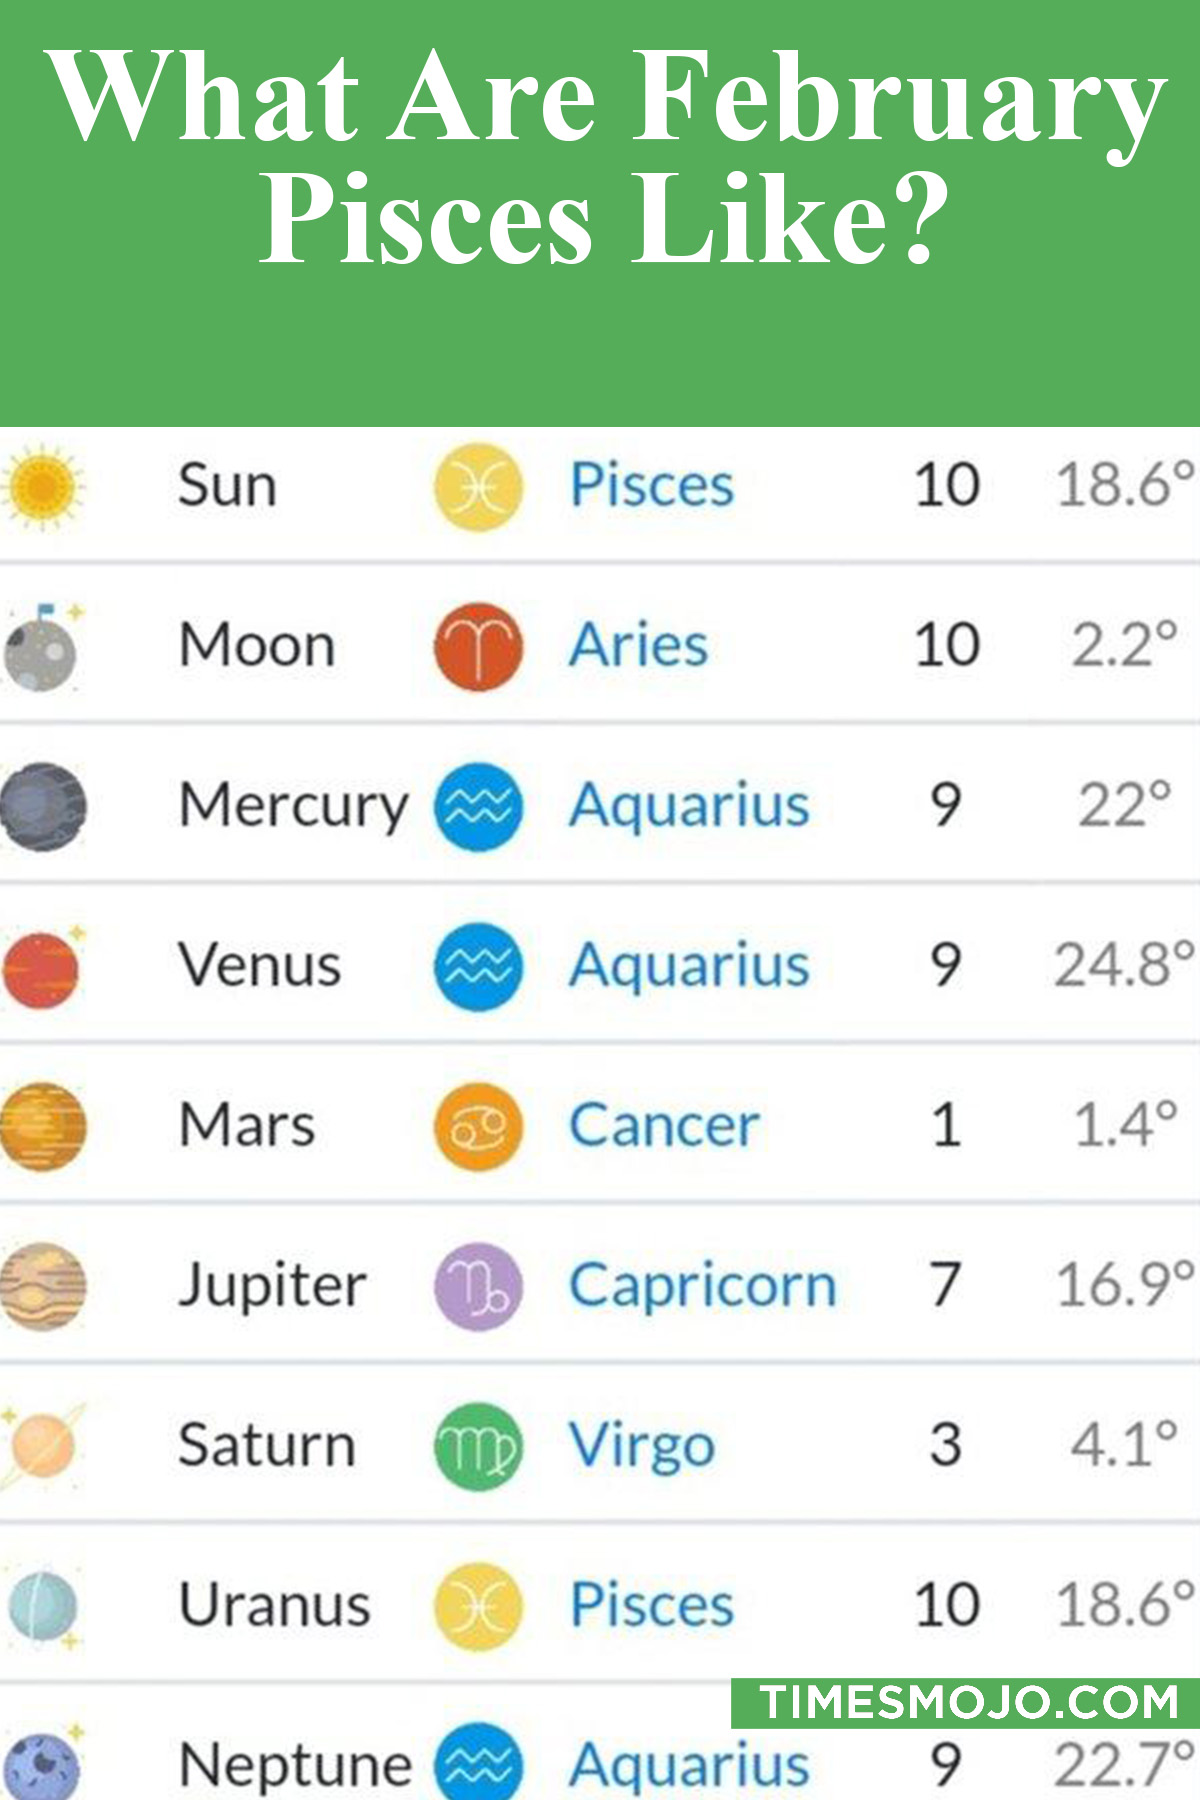 What are February Pisces like? - TimesMojo